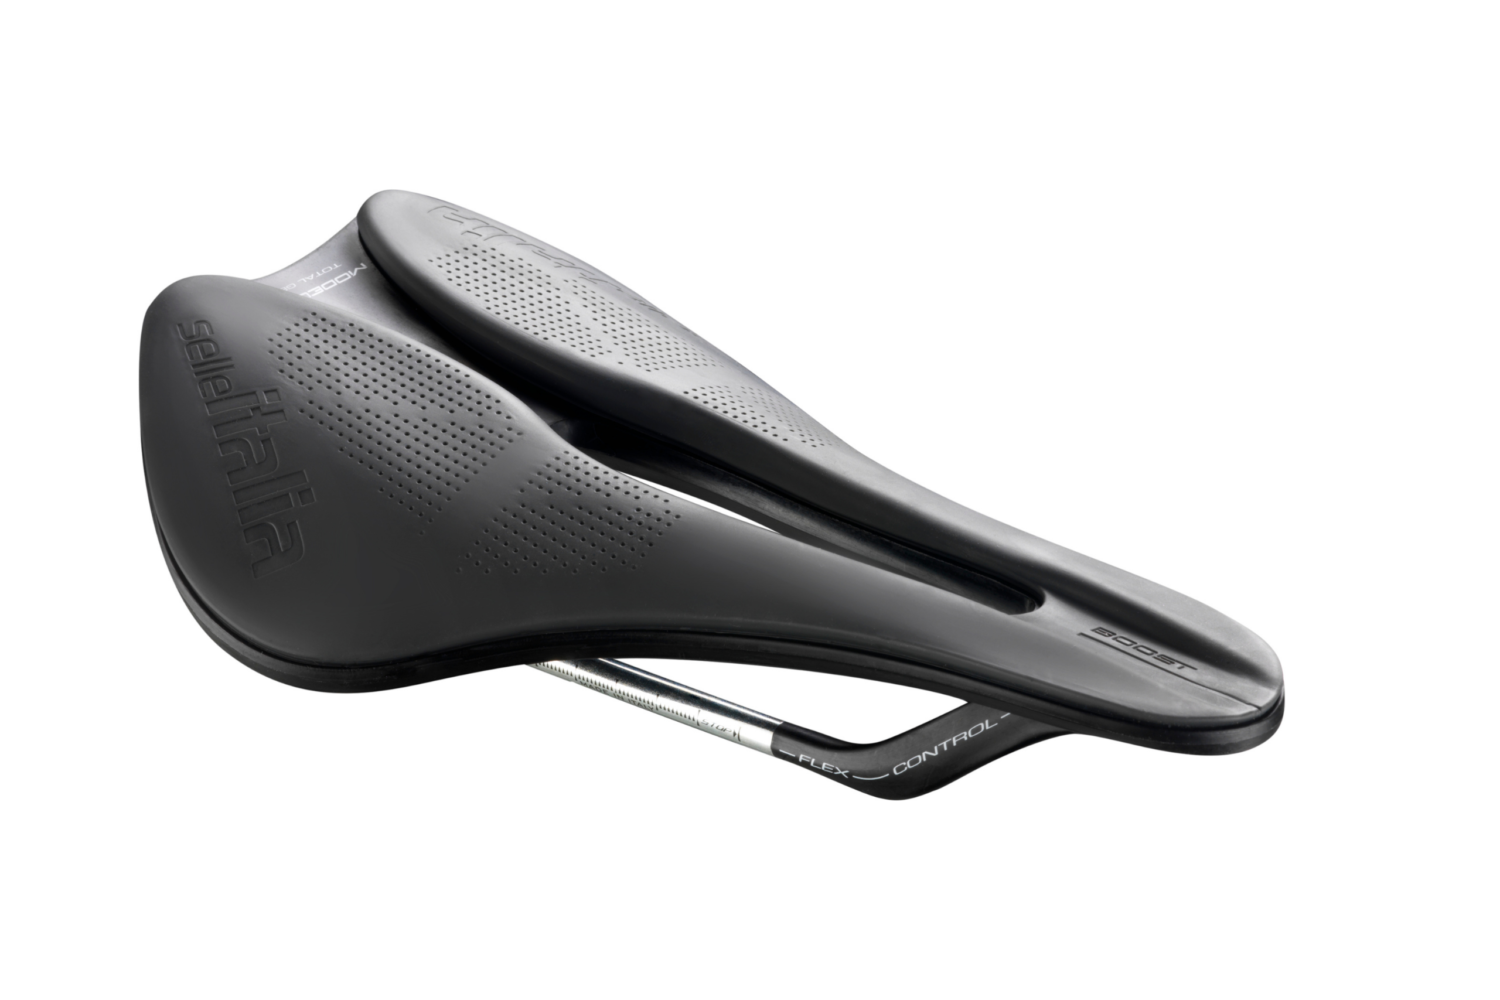 SELLE ITALIA Model X Green SuperFlow Saddle click to zoom image